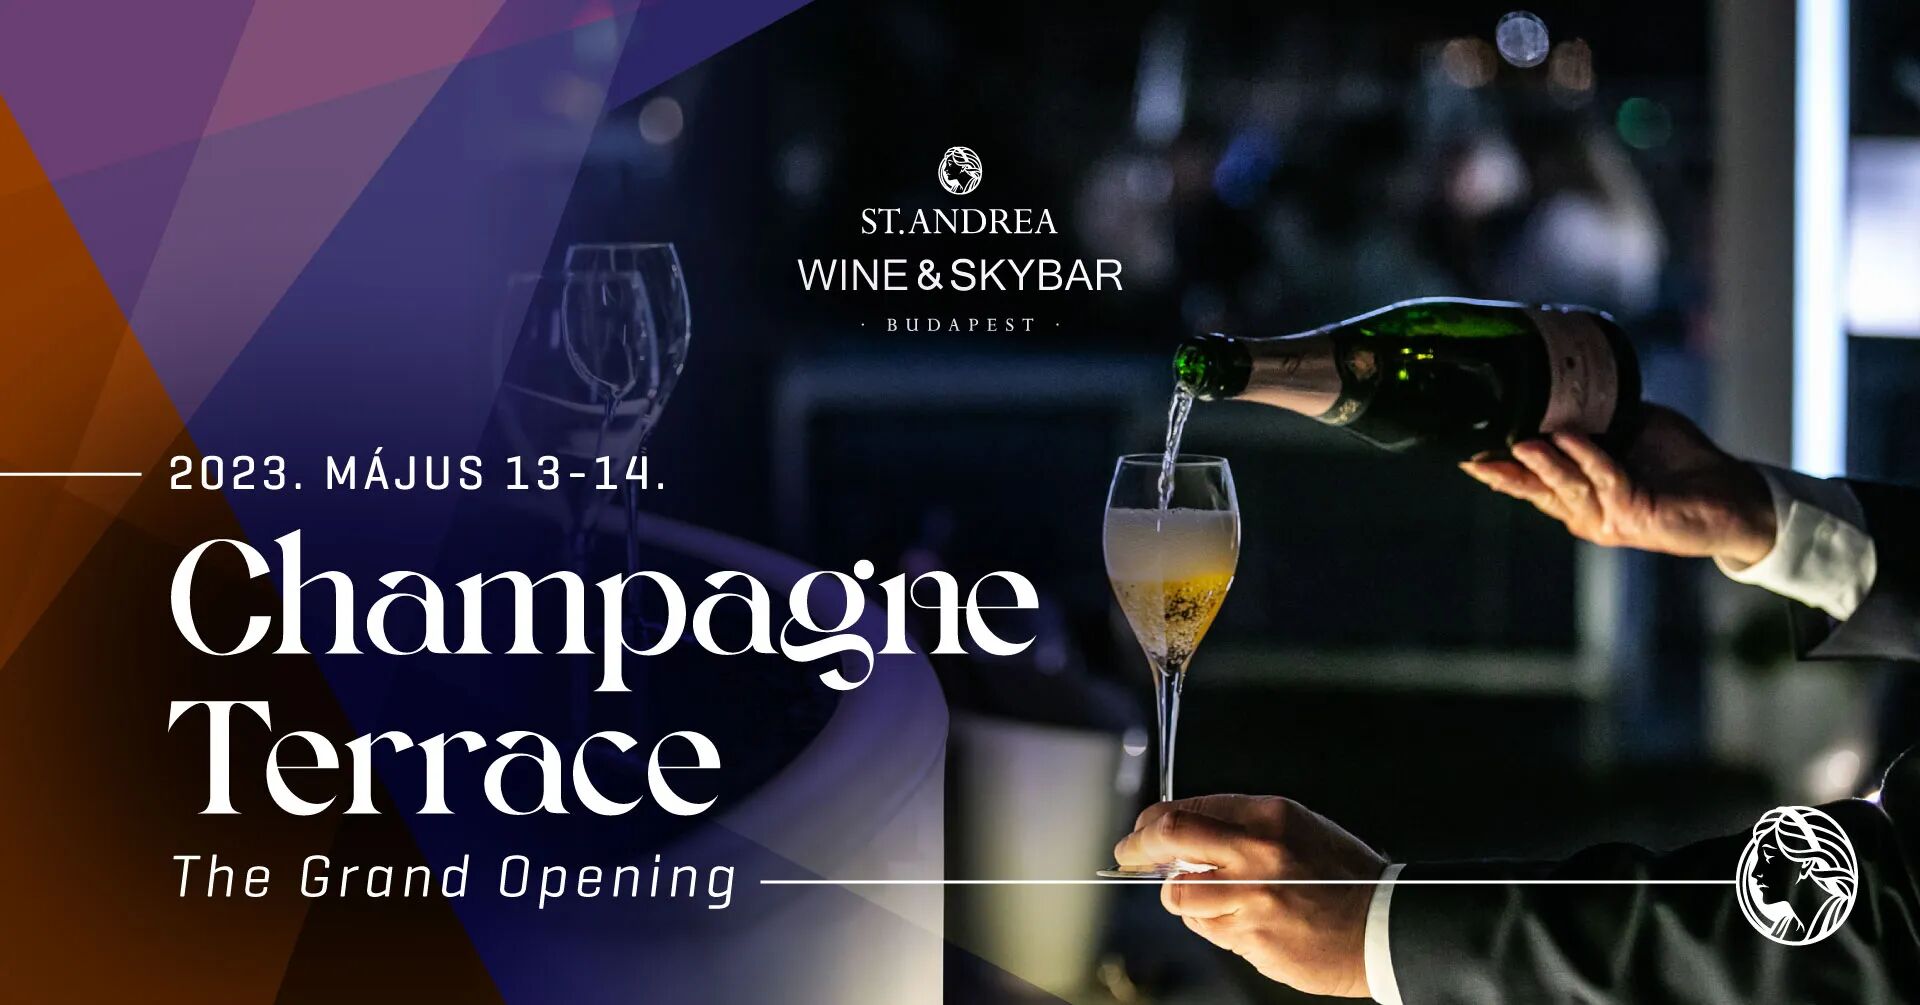 St. Andrea Champagne Terrace - The Grand Opening